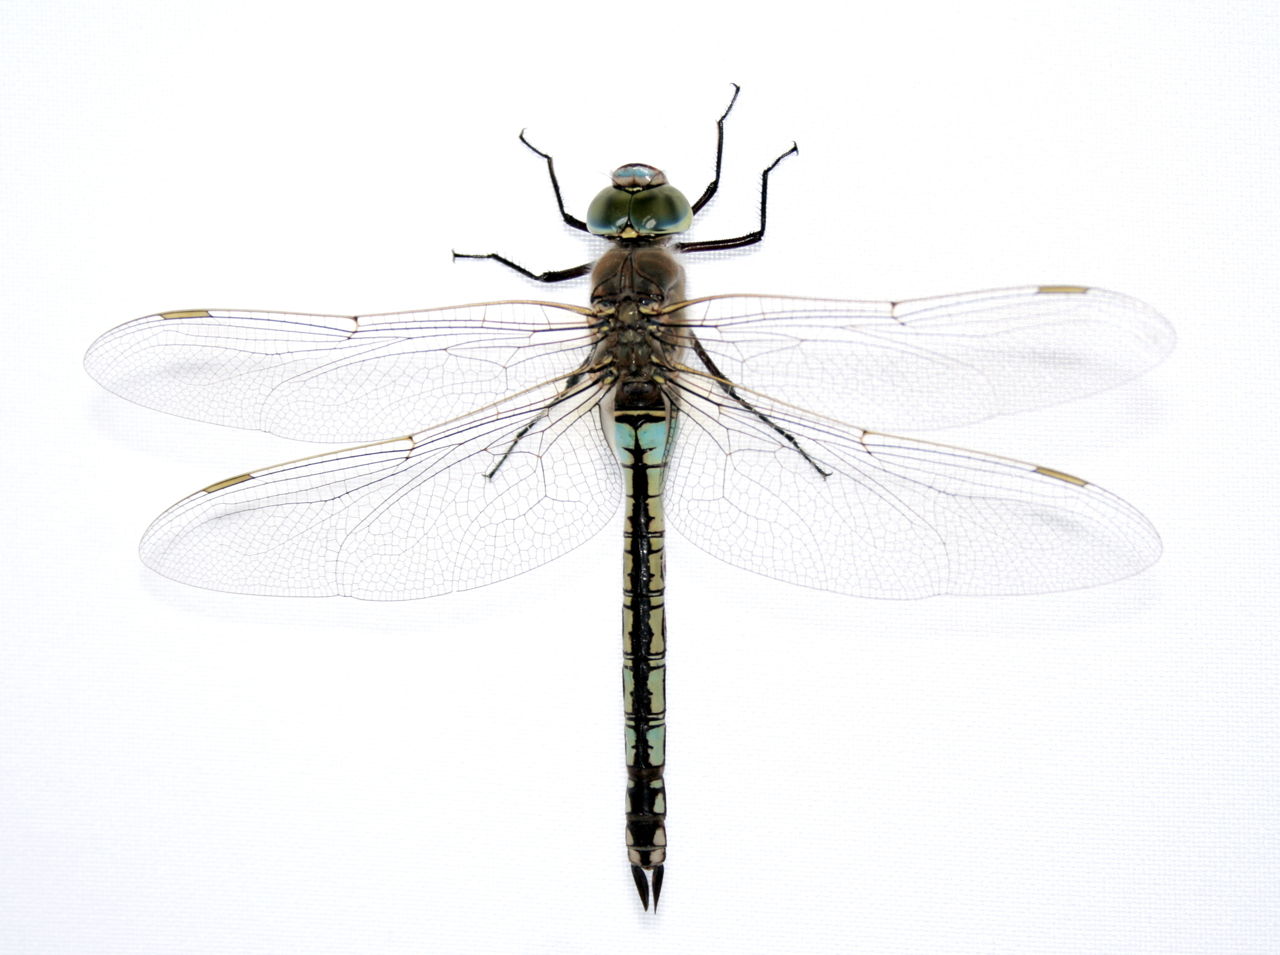 Facts about Dragonflies